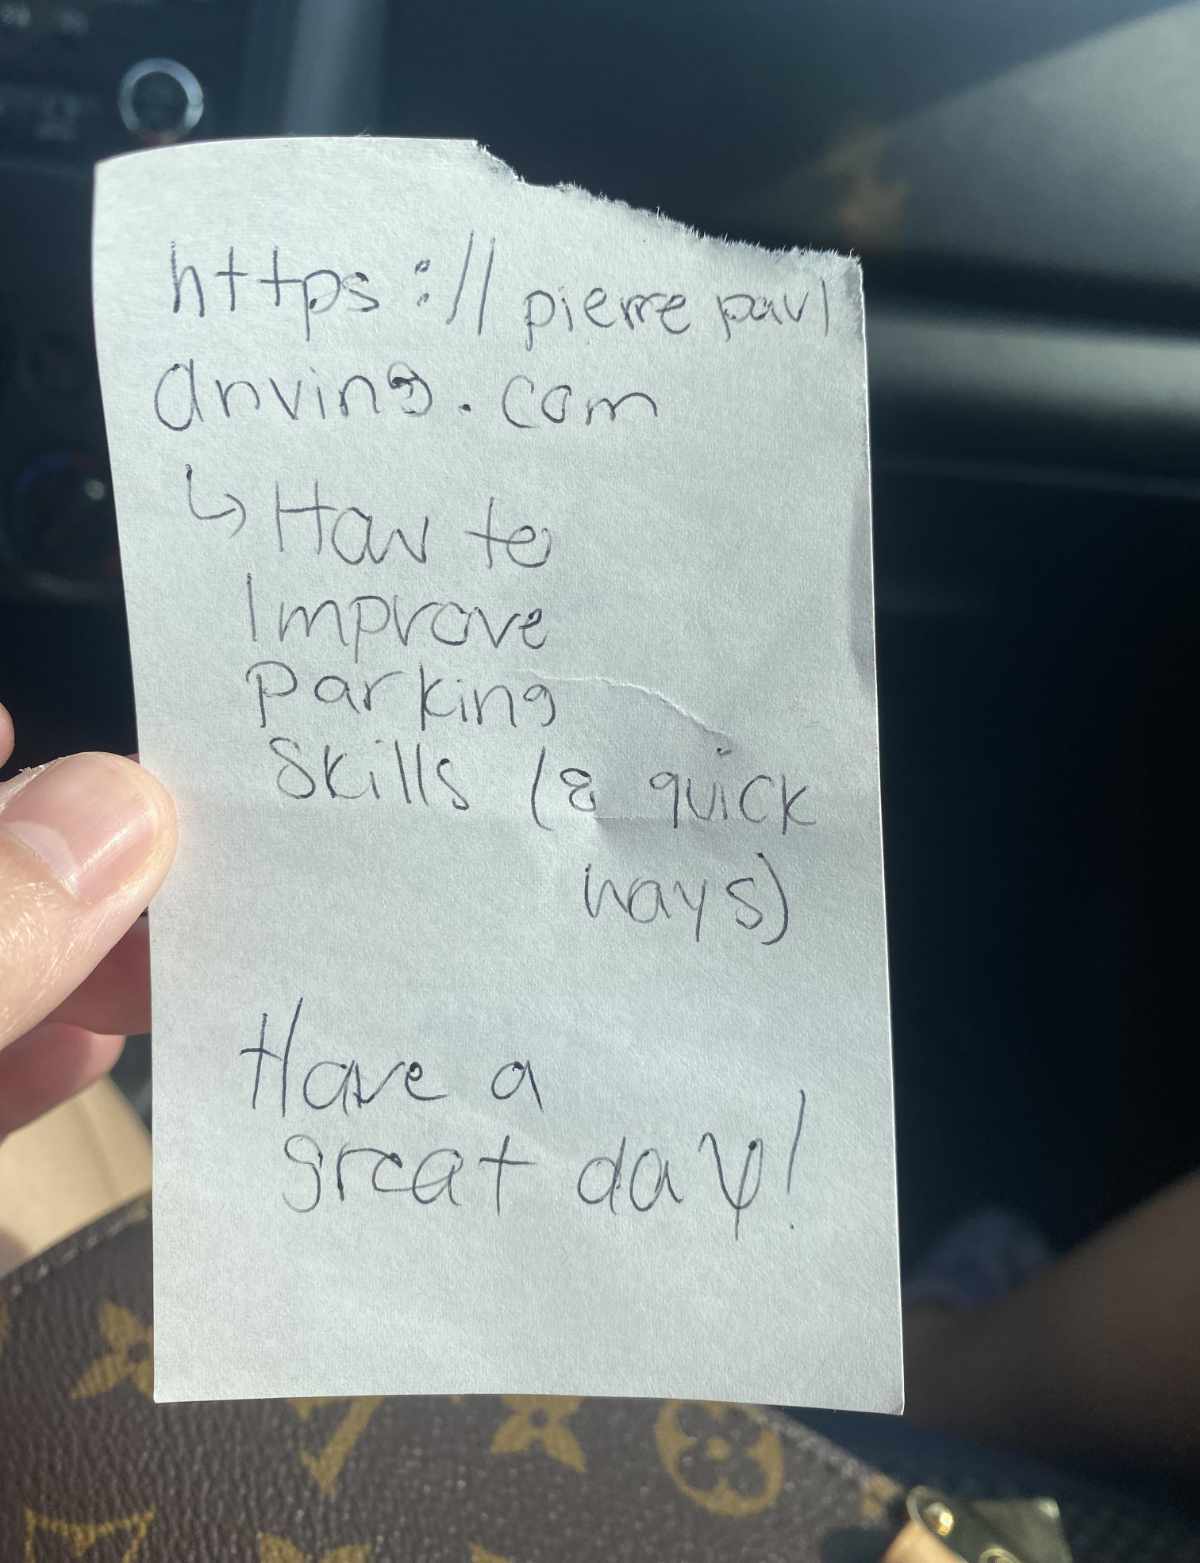 Someone left this on my husband’s car